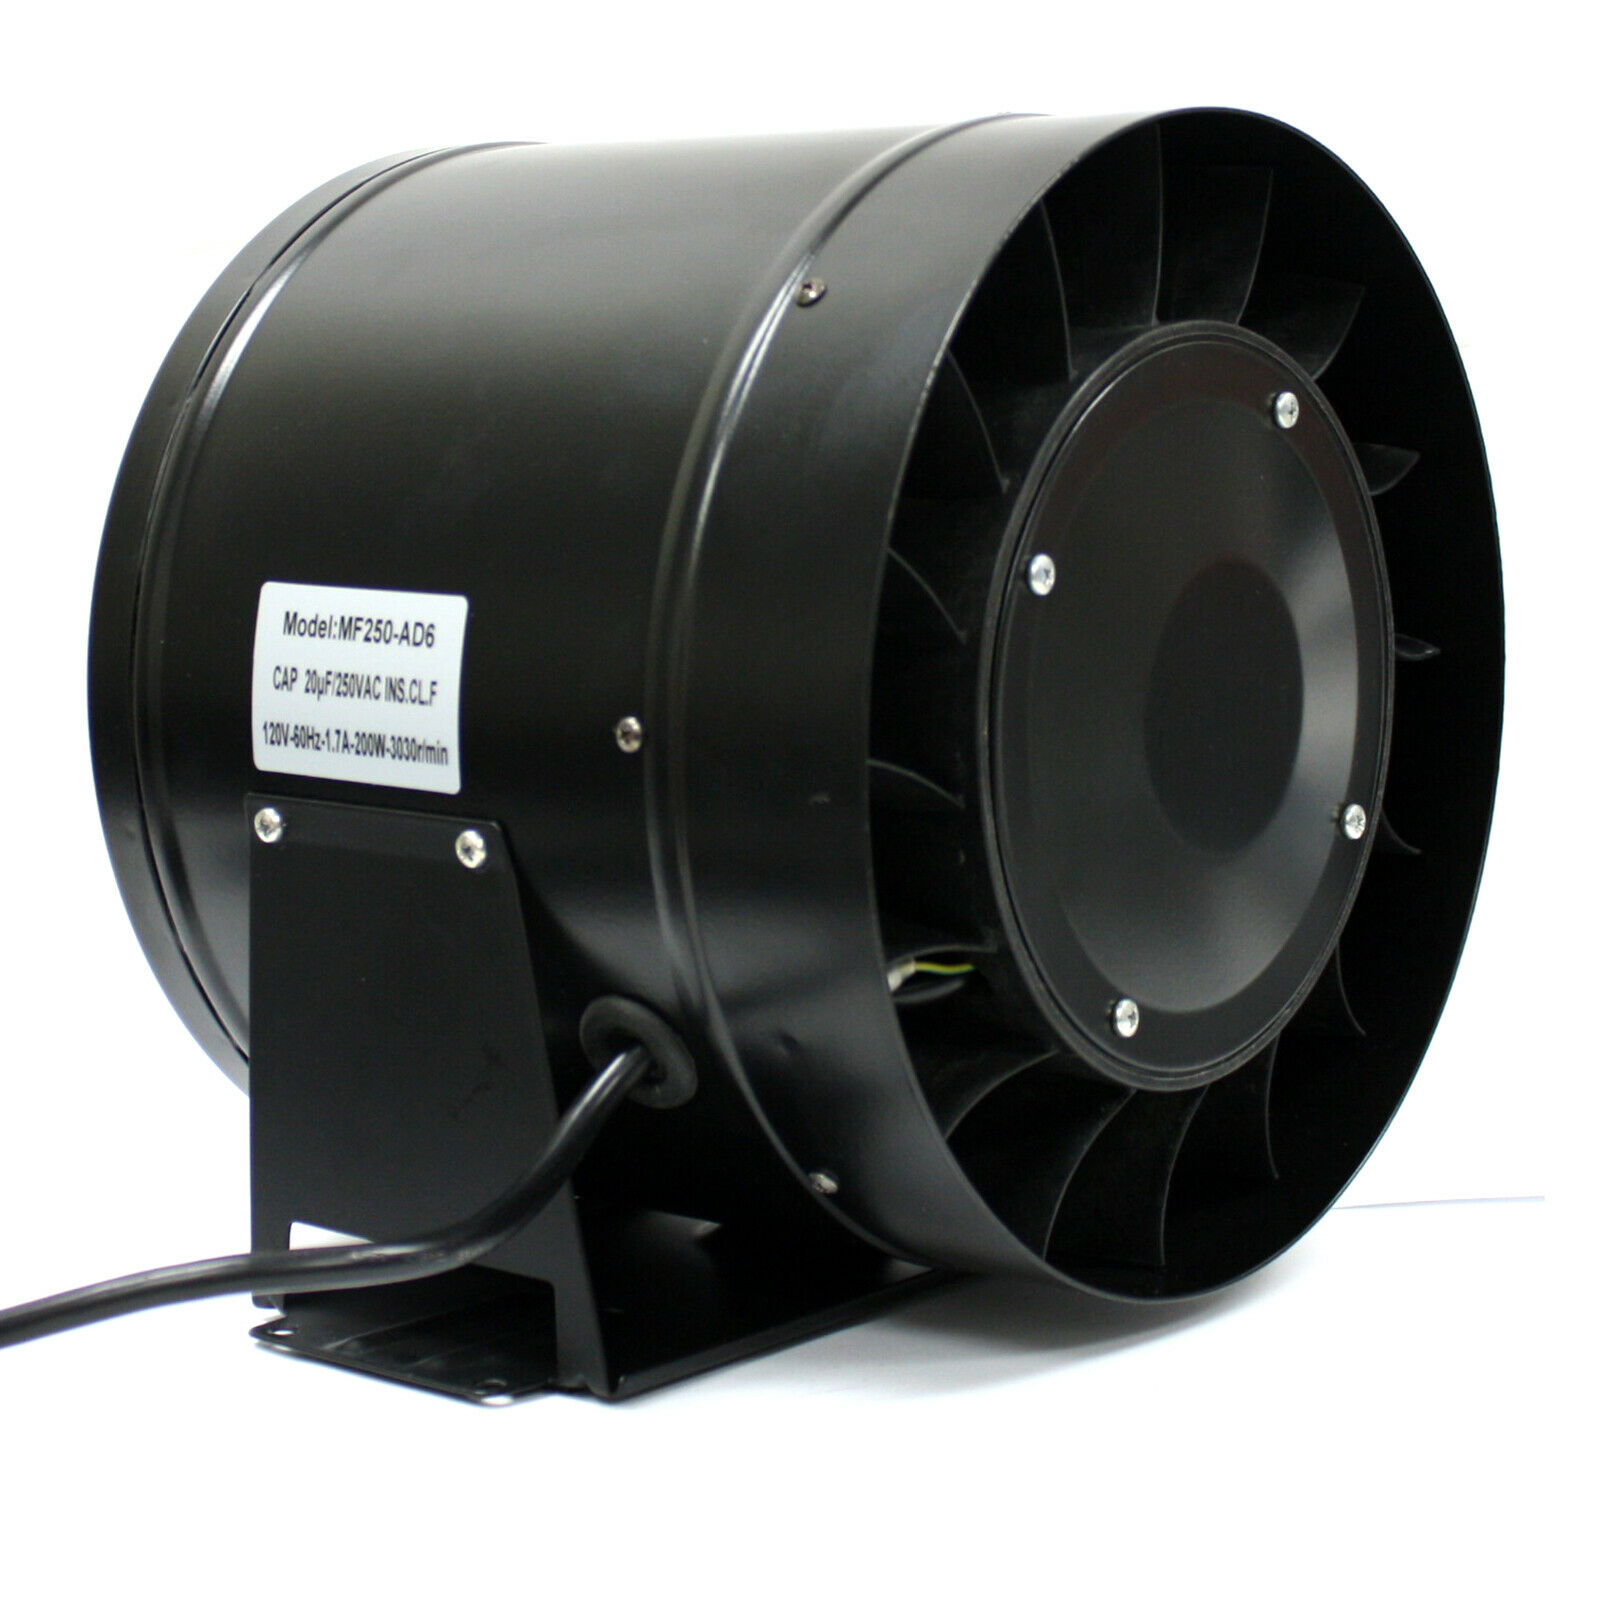 Details about   10" Inline Fan 1019 CFM Duct Booster Exhaust Cooling Ventilation Can-Fan Black 